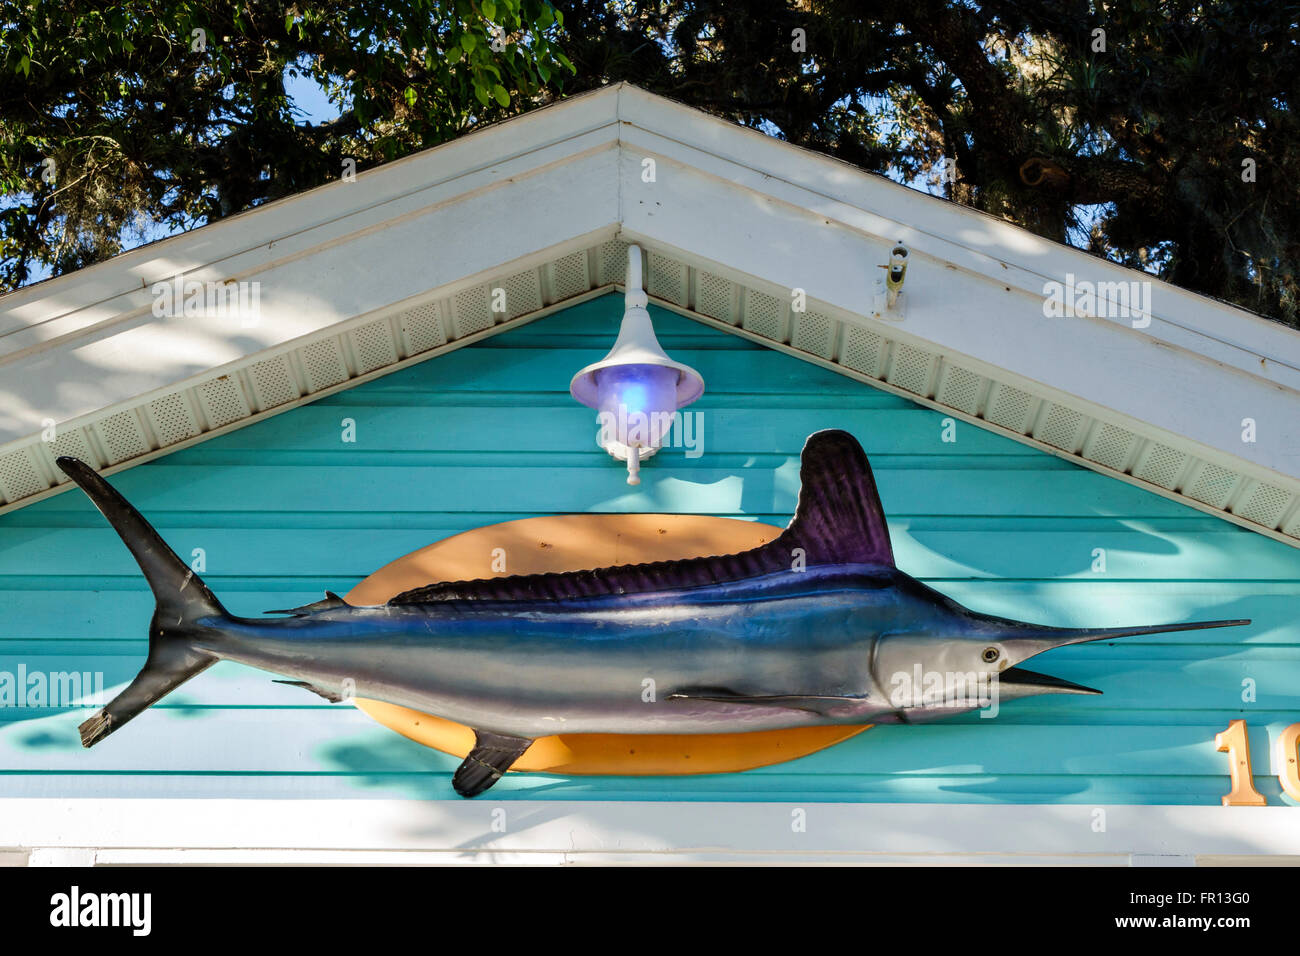 Florida Palm Harbor,Thirsty Marlin,restaurant restaurants food dining cafe cafes,outside exterior,mounted,large fish,FL160212069 Stock Photo